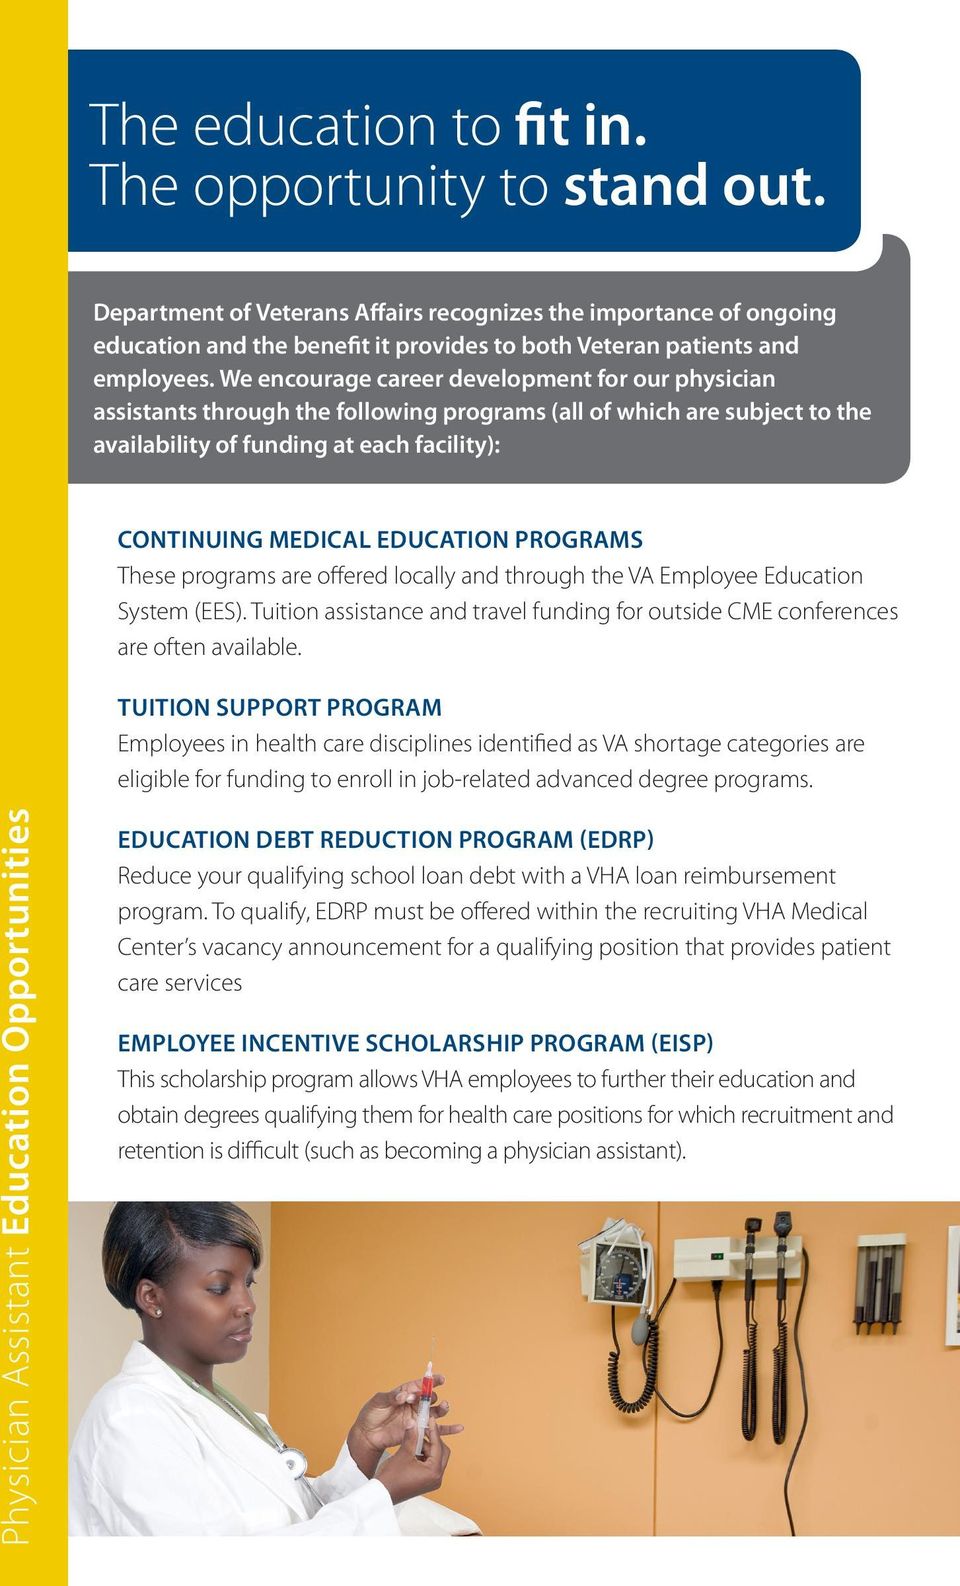 PROGRAMS These programs are offered locally and through the VA Employee Education System (EES). Tuition assistance and travel funding for outside CME conferences are often available.